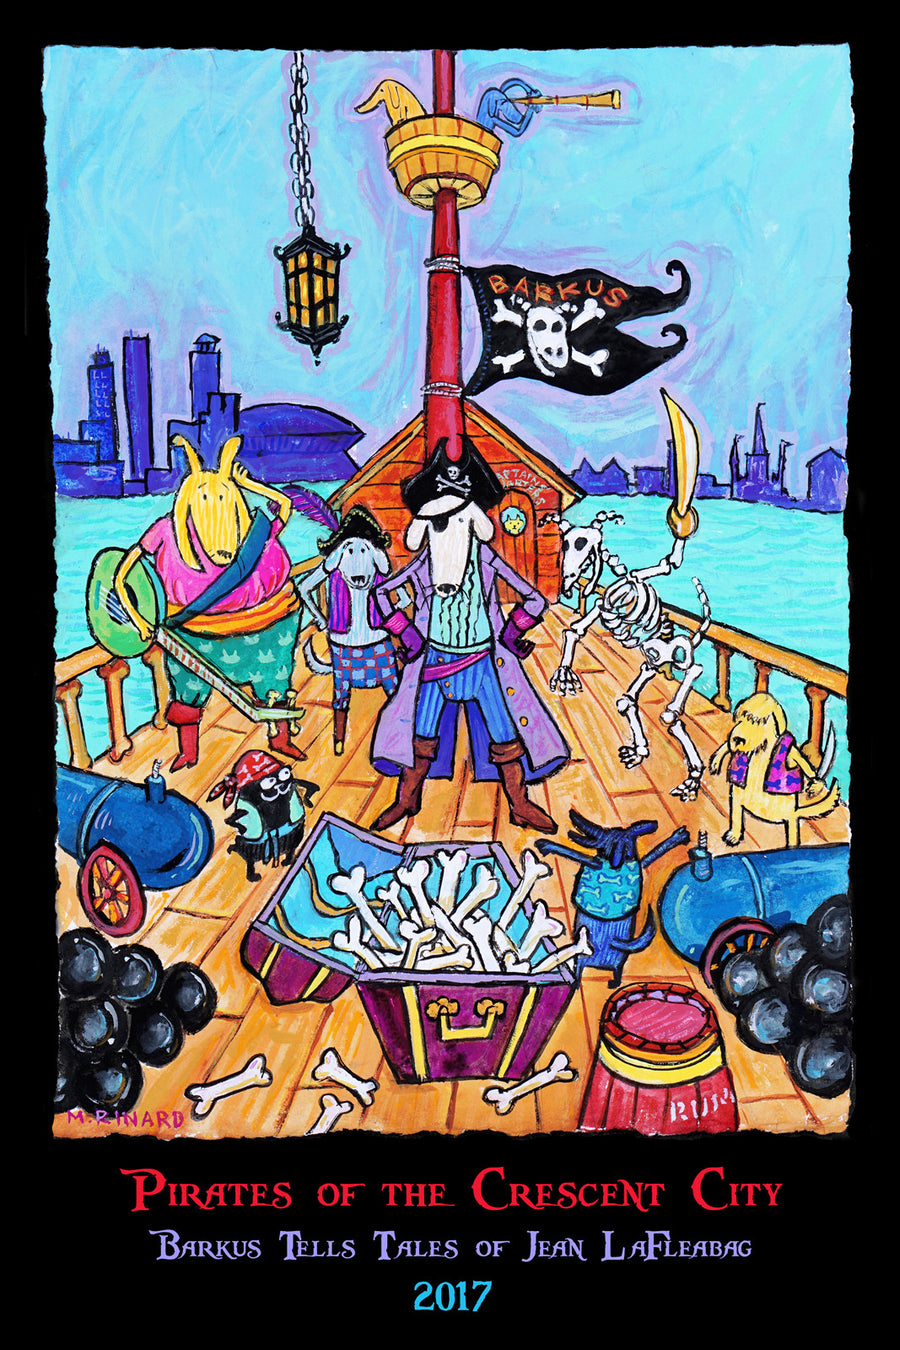 Pirates of the Crescent City: Barkus Tells Tales of Jean LaFleaBag 2017 Poster